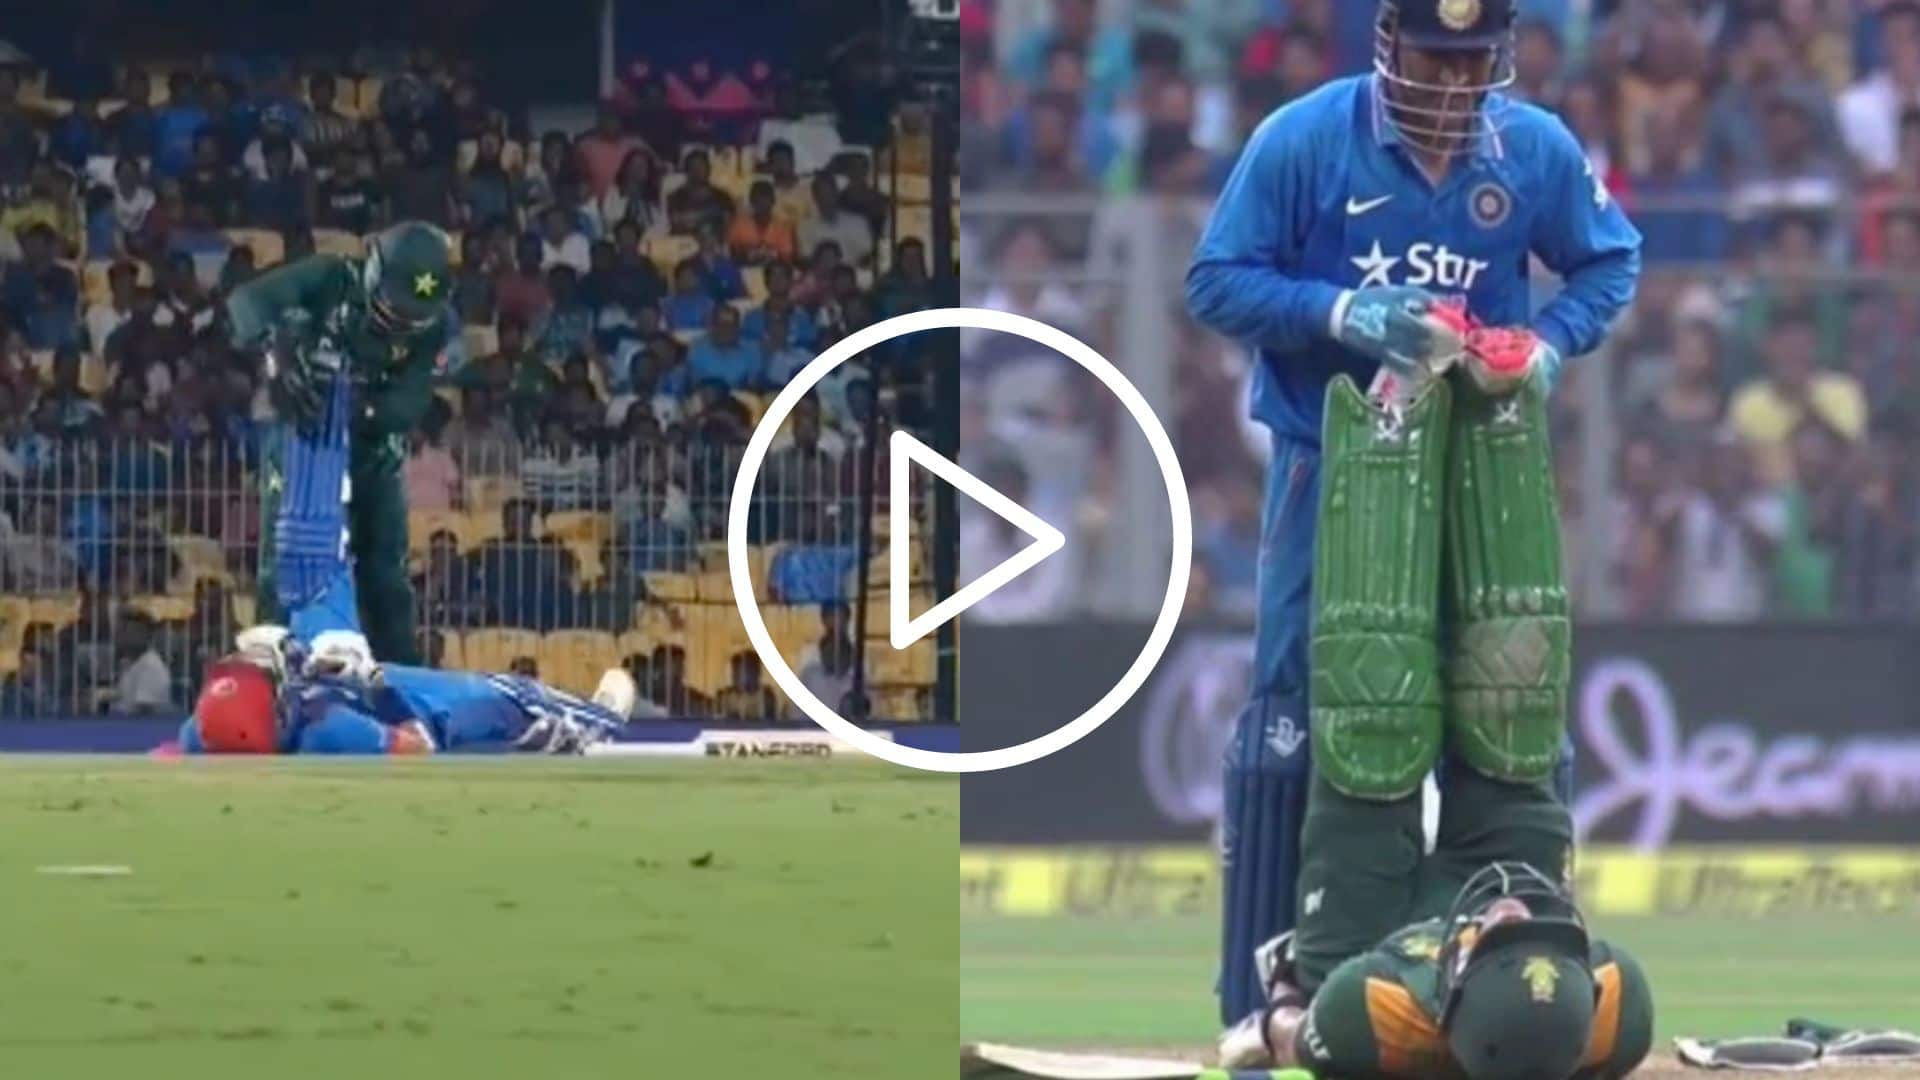 [Watch] Mohammad Rizwan's ‘Adorable’ Aid For Zadran's Cramps Reminds Fans Of MS Dhoni